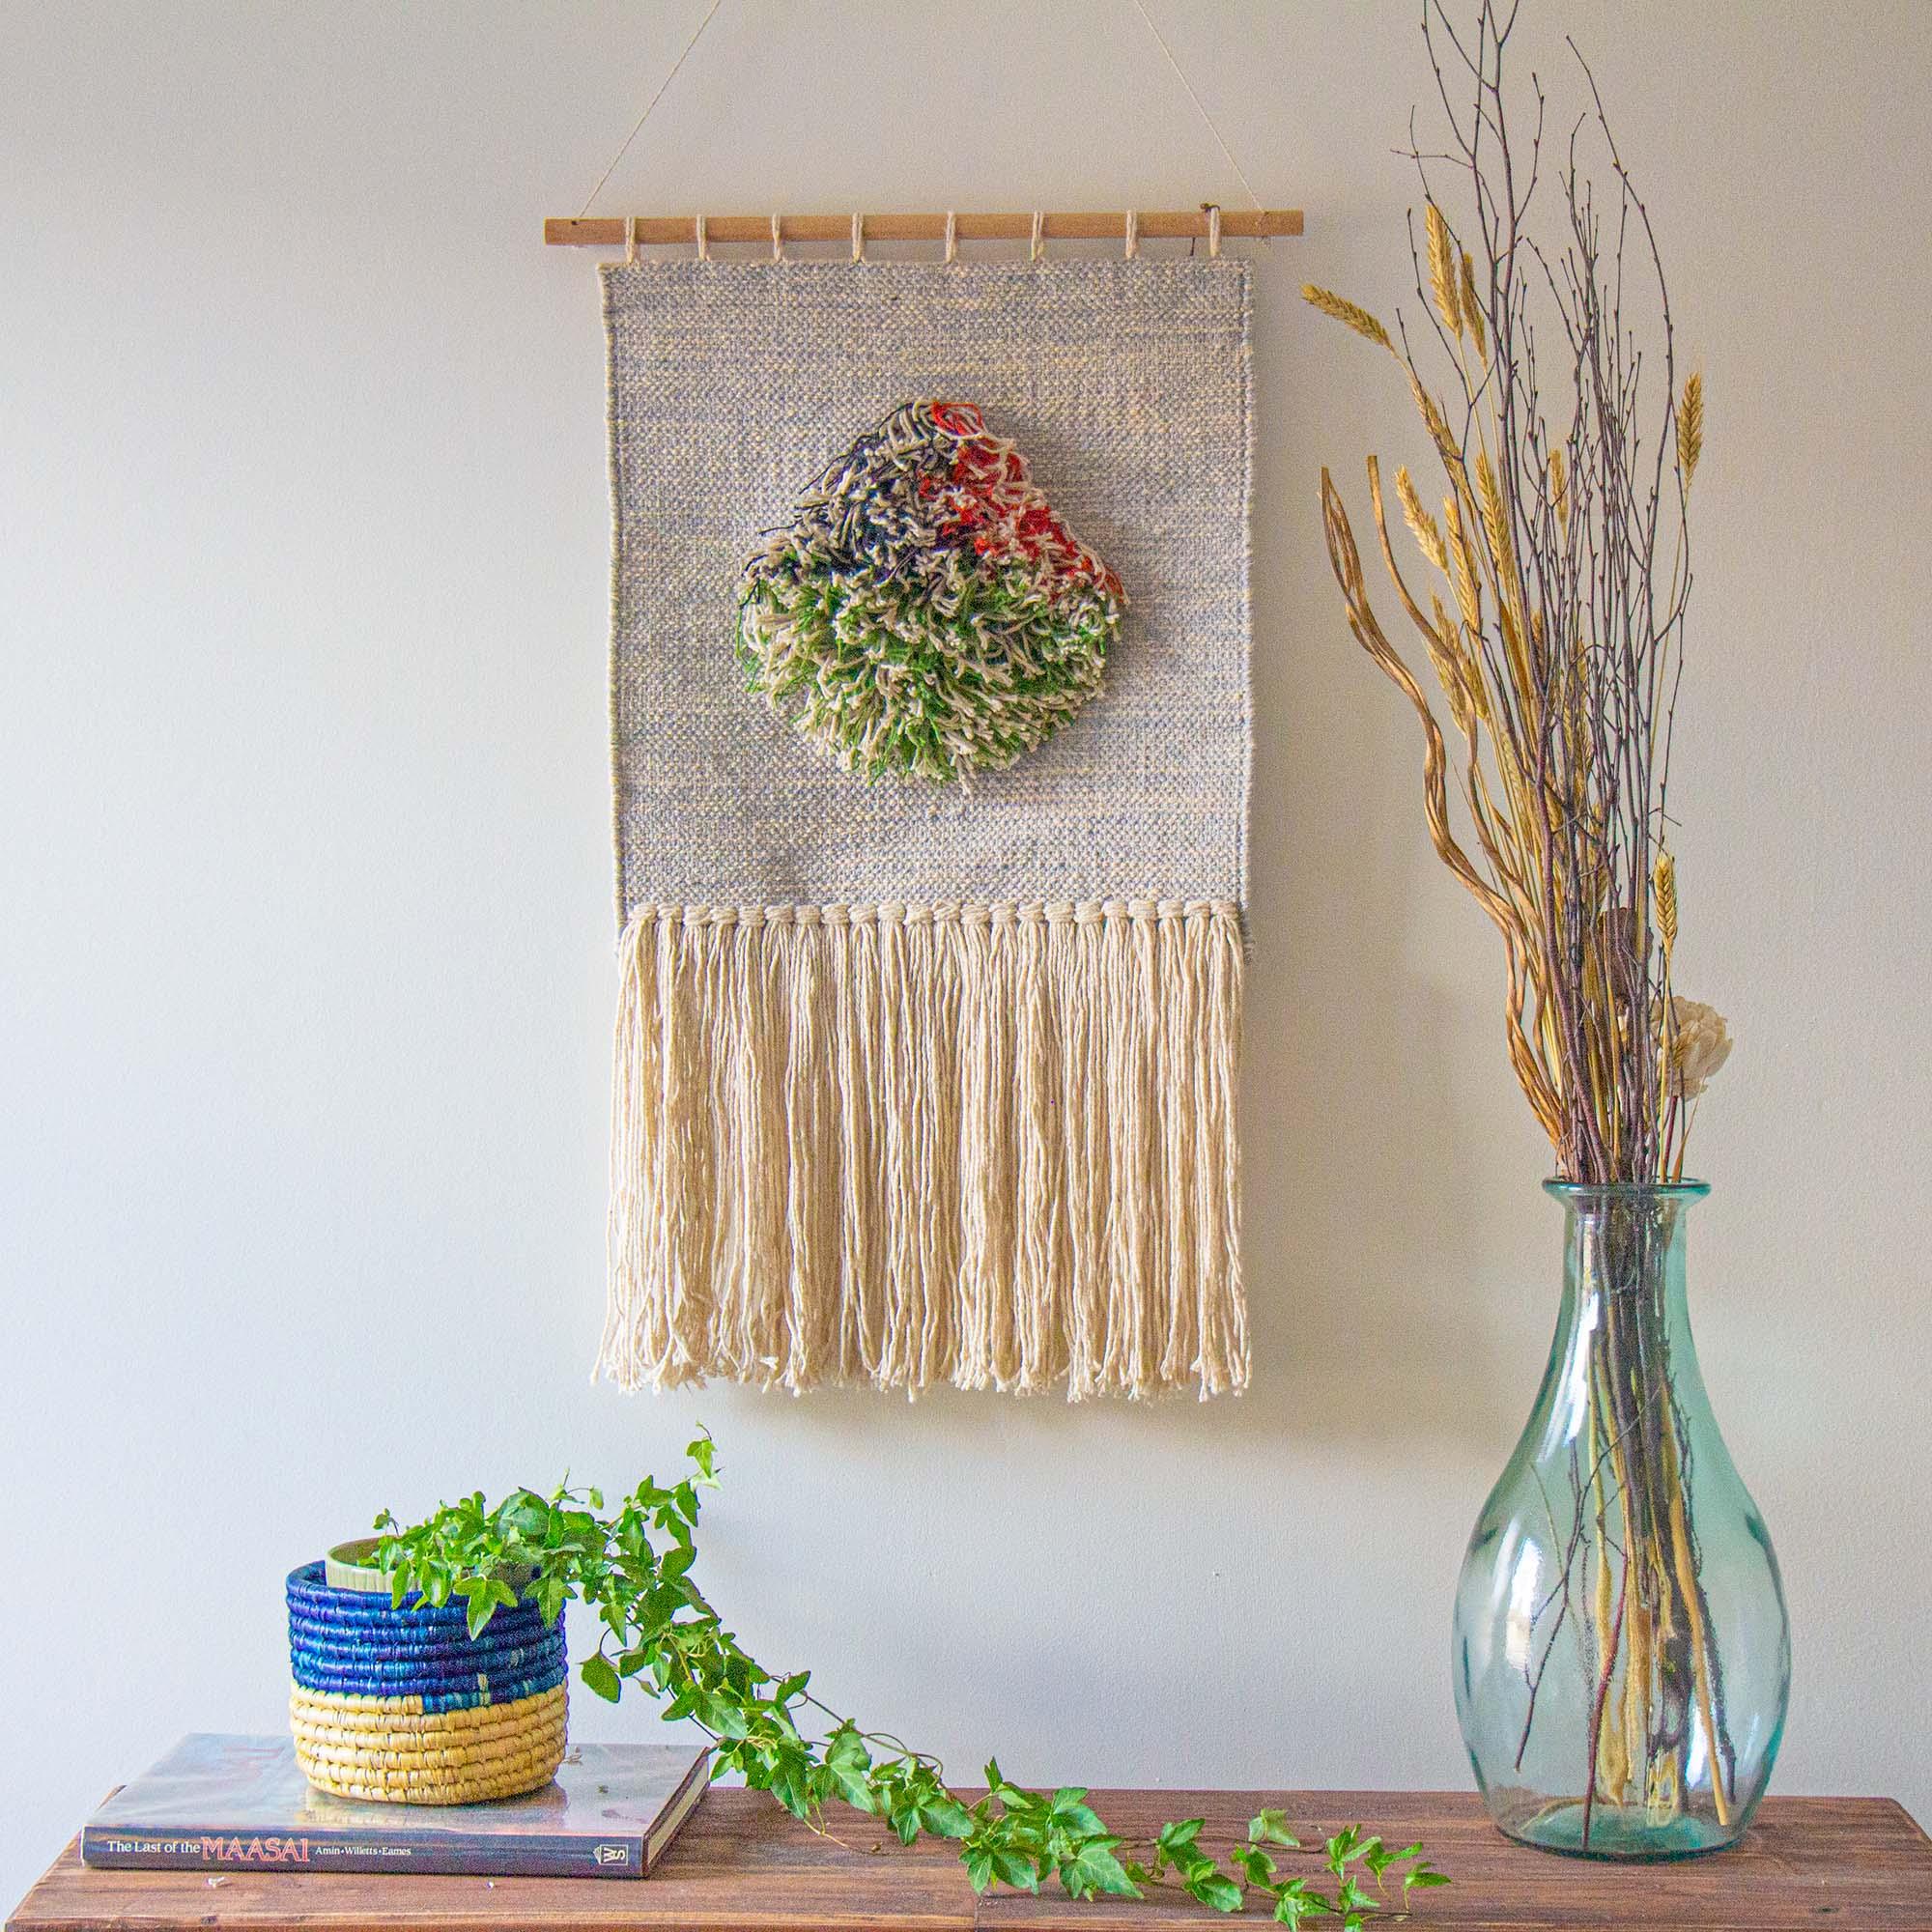 Handwoven Boho Wall Hanging, Neutral with Pop of Color - Flyclothing LLC